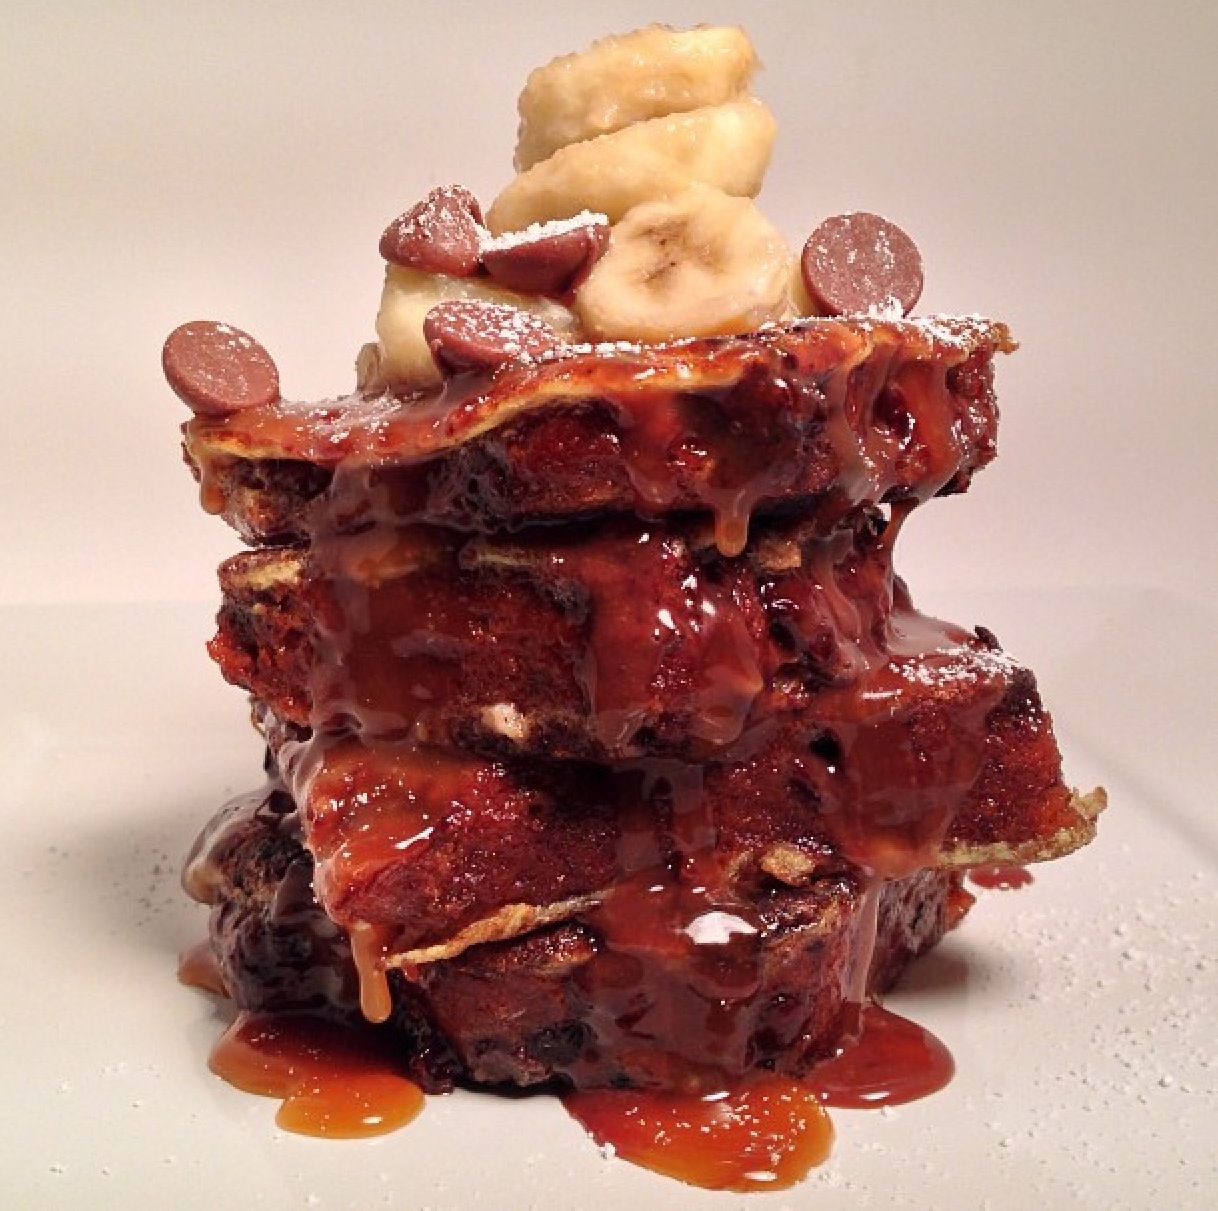 Chocolate Chip Banana Bread French Toast with milk chocolate sauce by @chef_patrick420